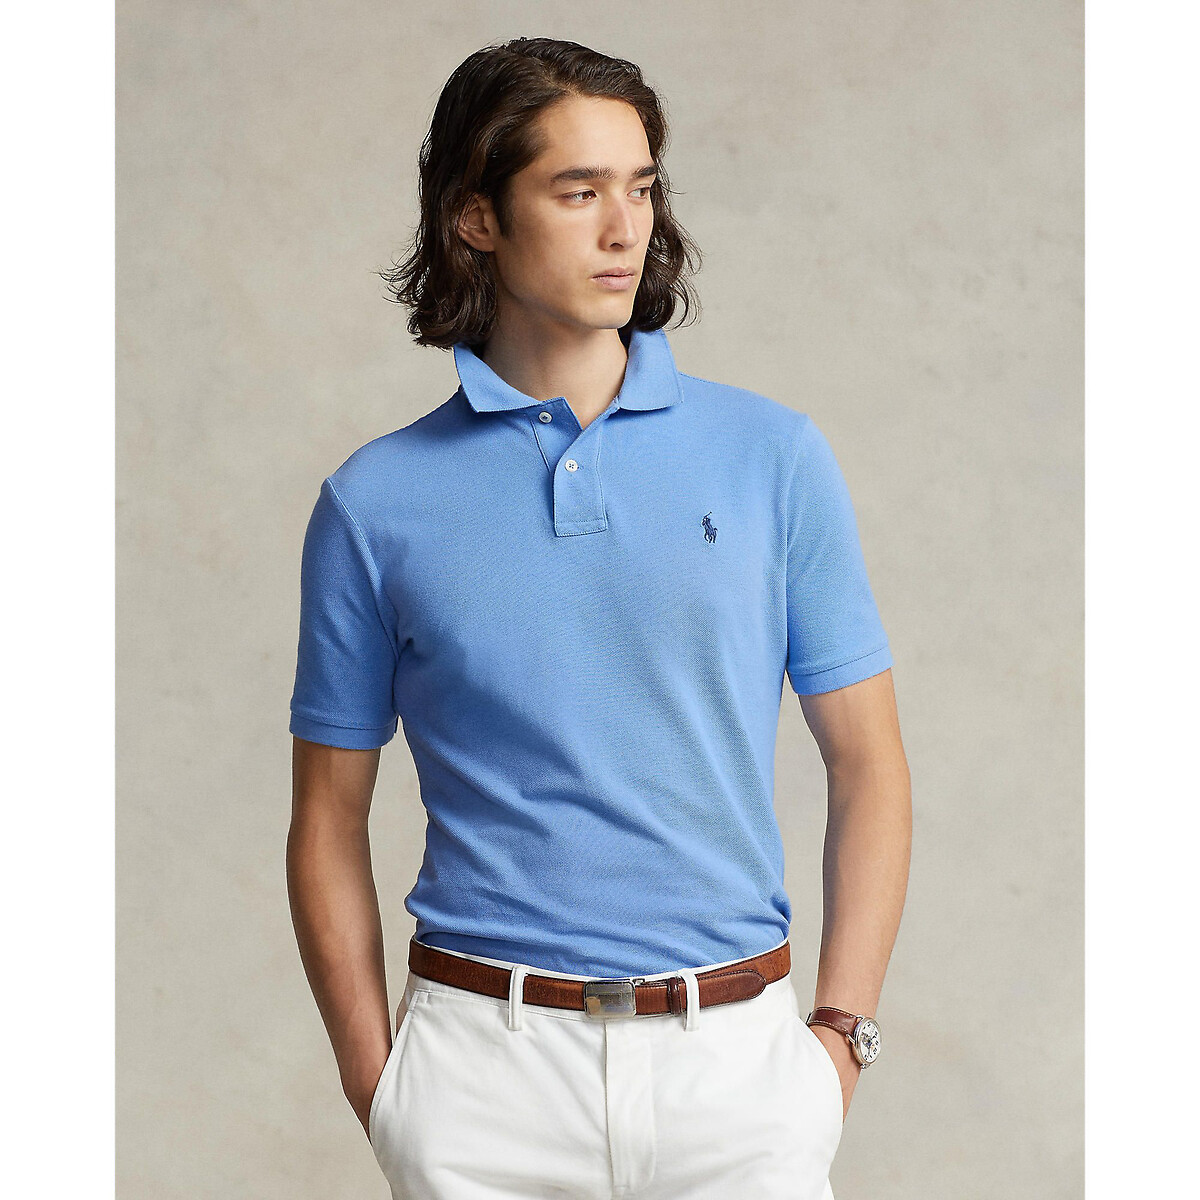 Image of Cotton Slim Fit Polo Shirt with Short Sleeves